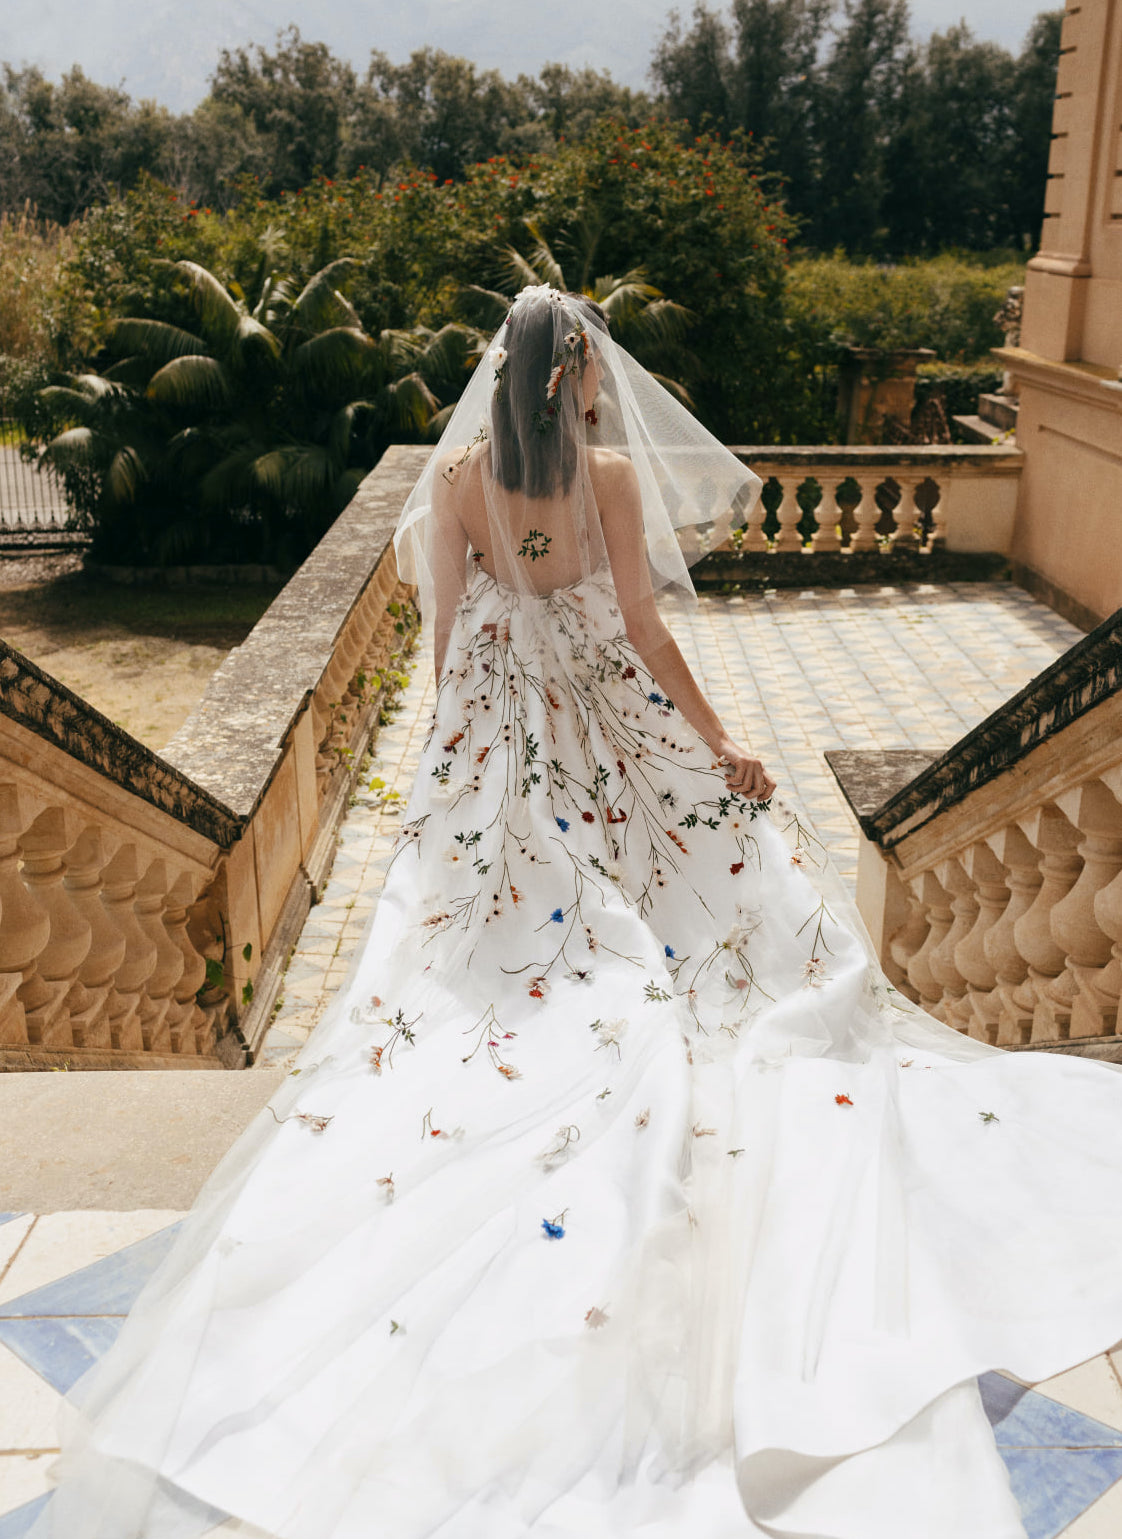 A bride wears a Monique Lhuillier wedding gown that is short and fitted with a flowing train. The strapless wedding dress has colorful embellished flowers covering it.